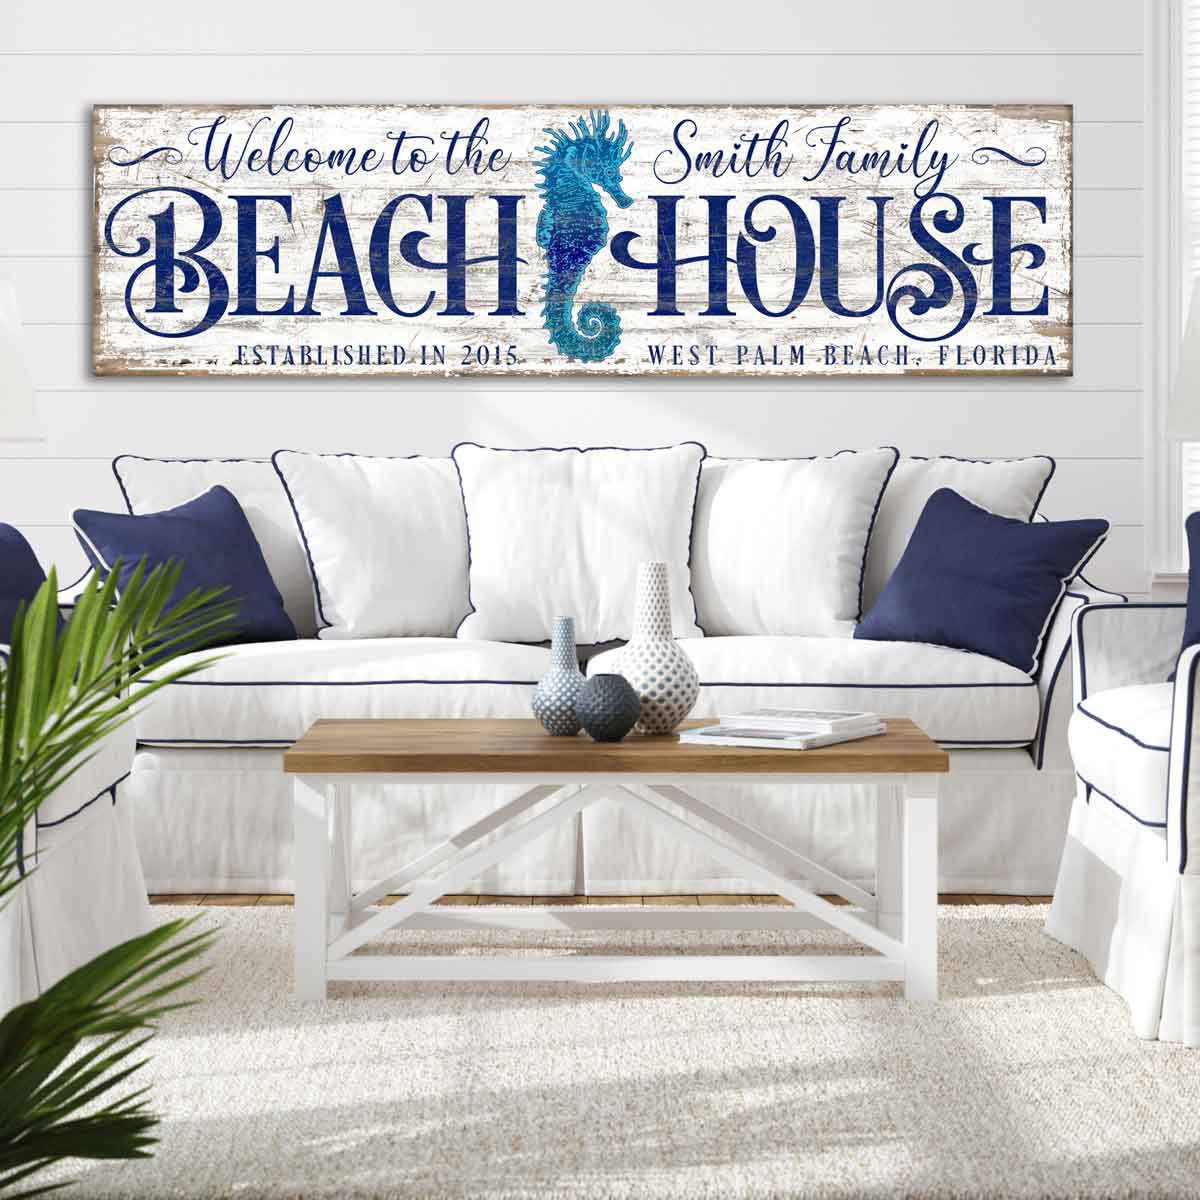 Coastal Decor seahorse beach house sign with distressed white paint on faux distressed wood canvas frame with words {welcome to our beach house] est. date and name and state